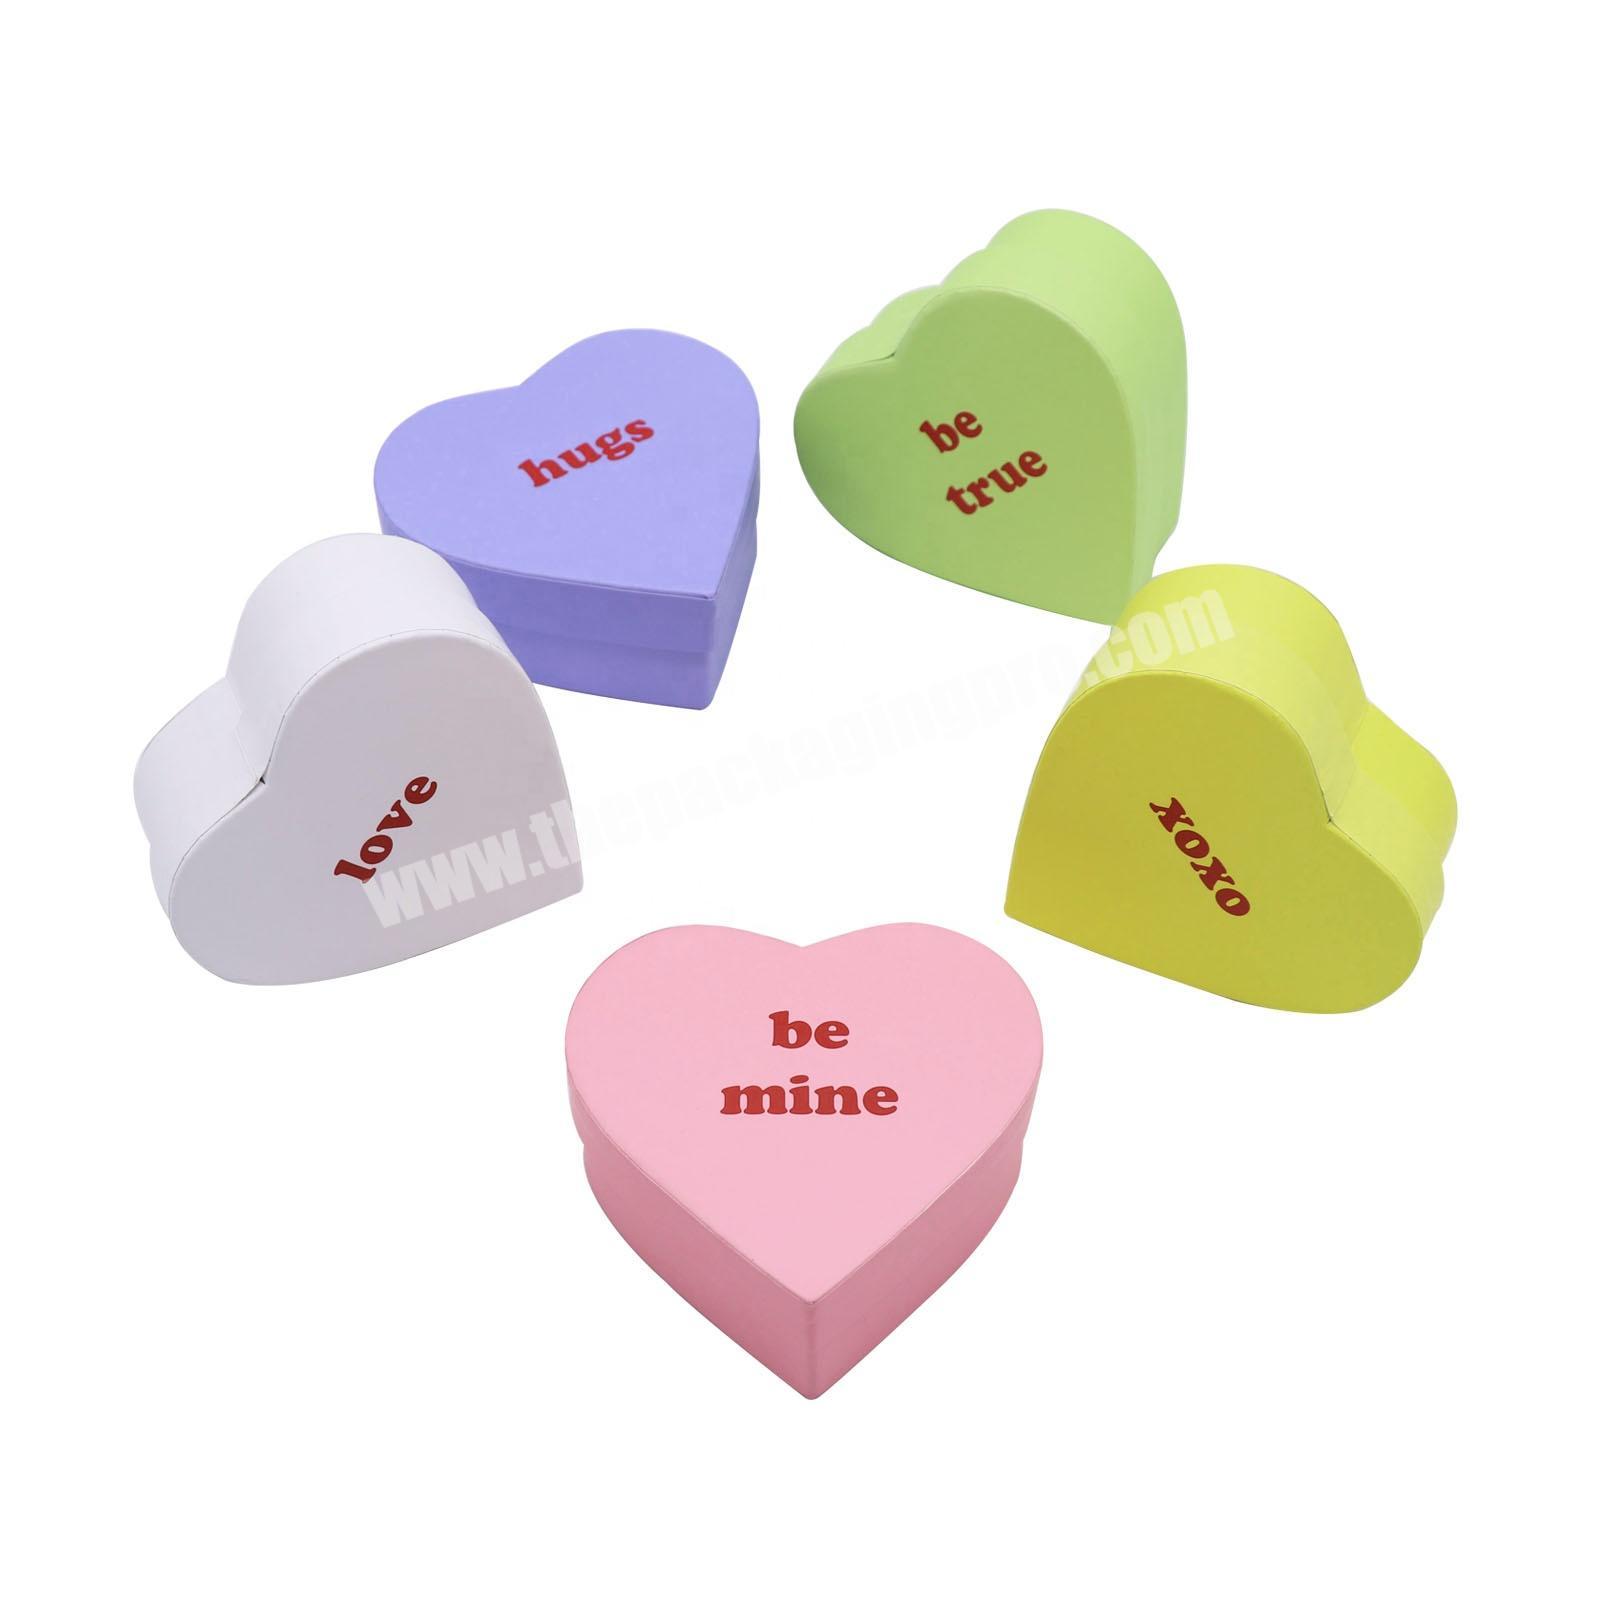 Chocolate paper box with dividers empty paper grids chocolate packaging gift box with plastic blister heart shape chocolate box